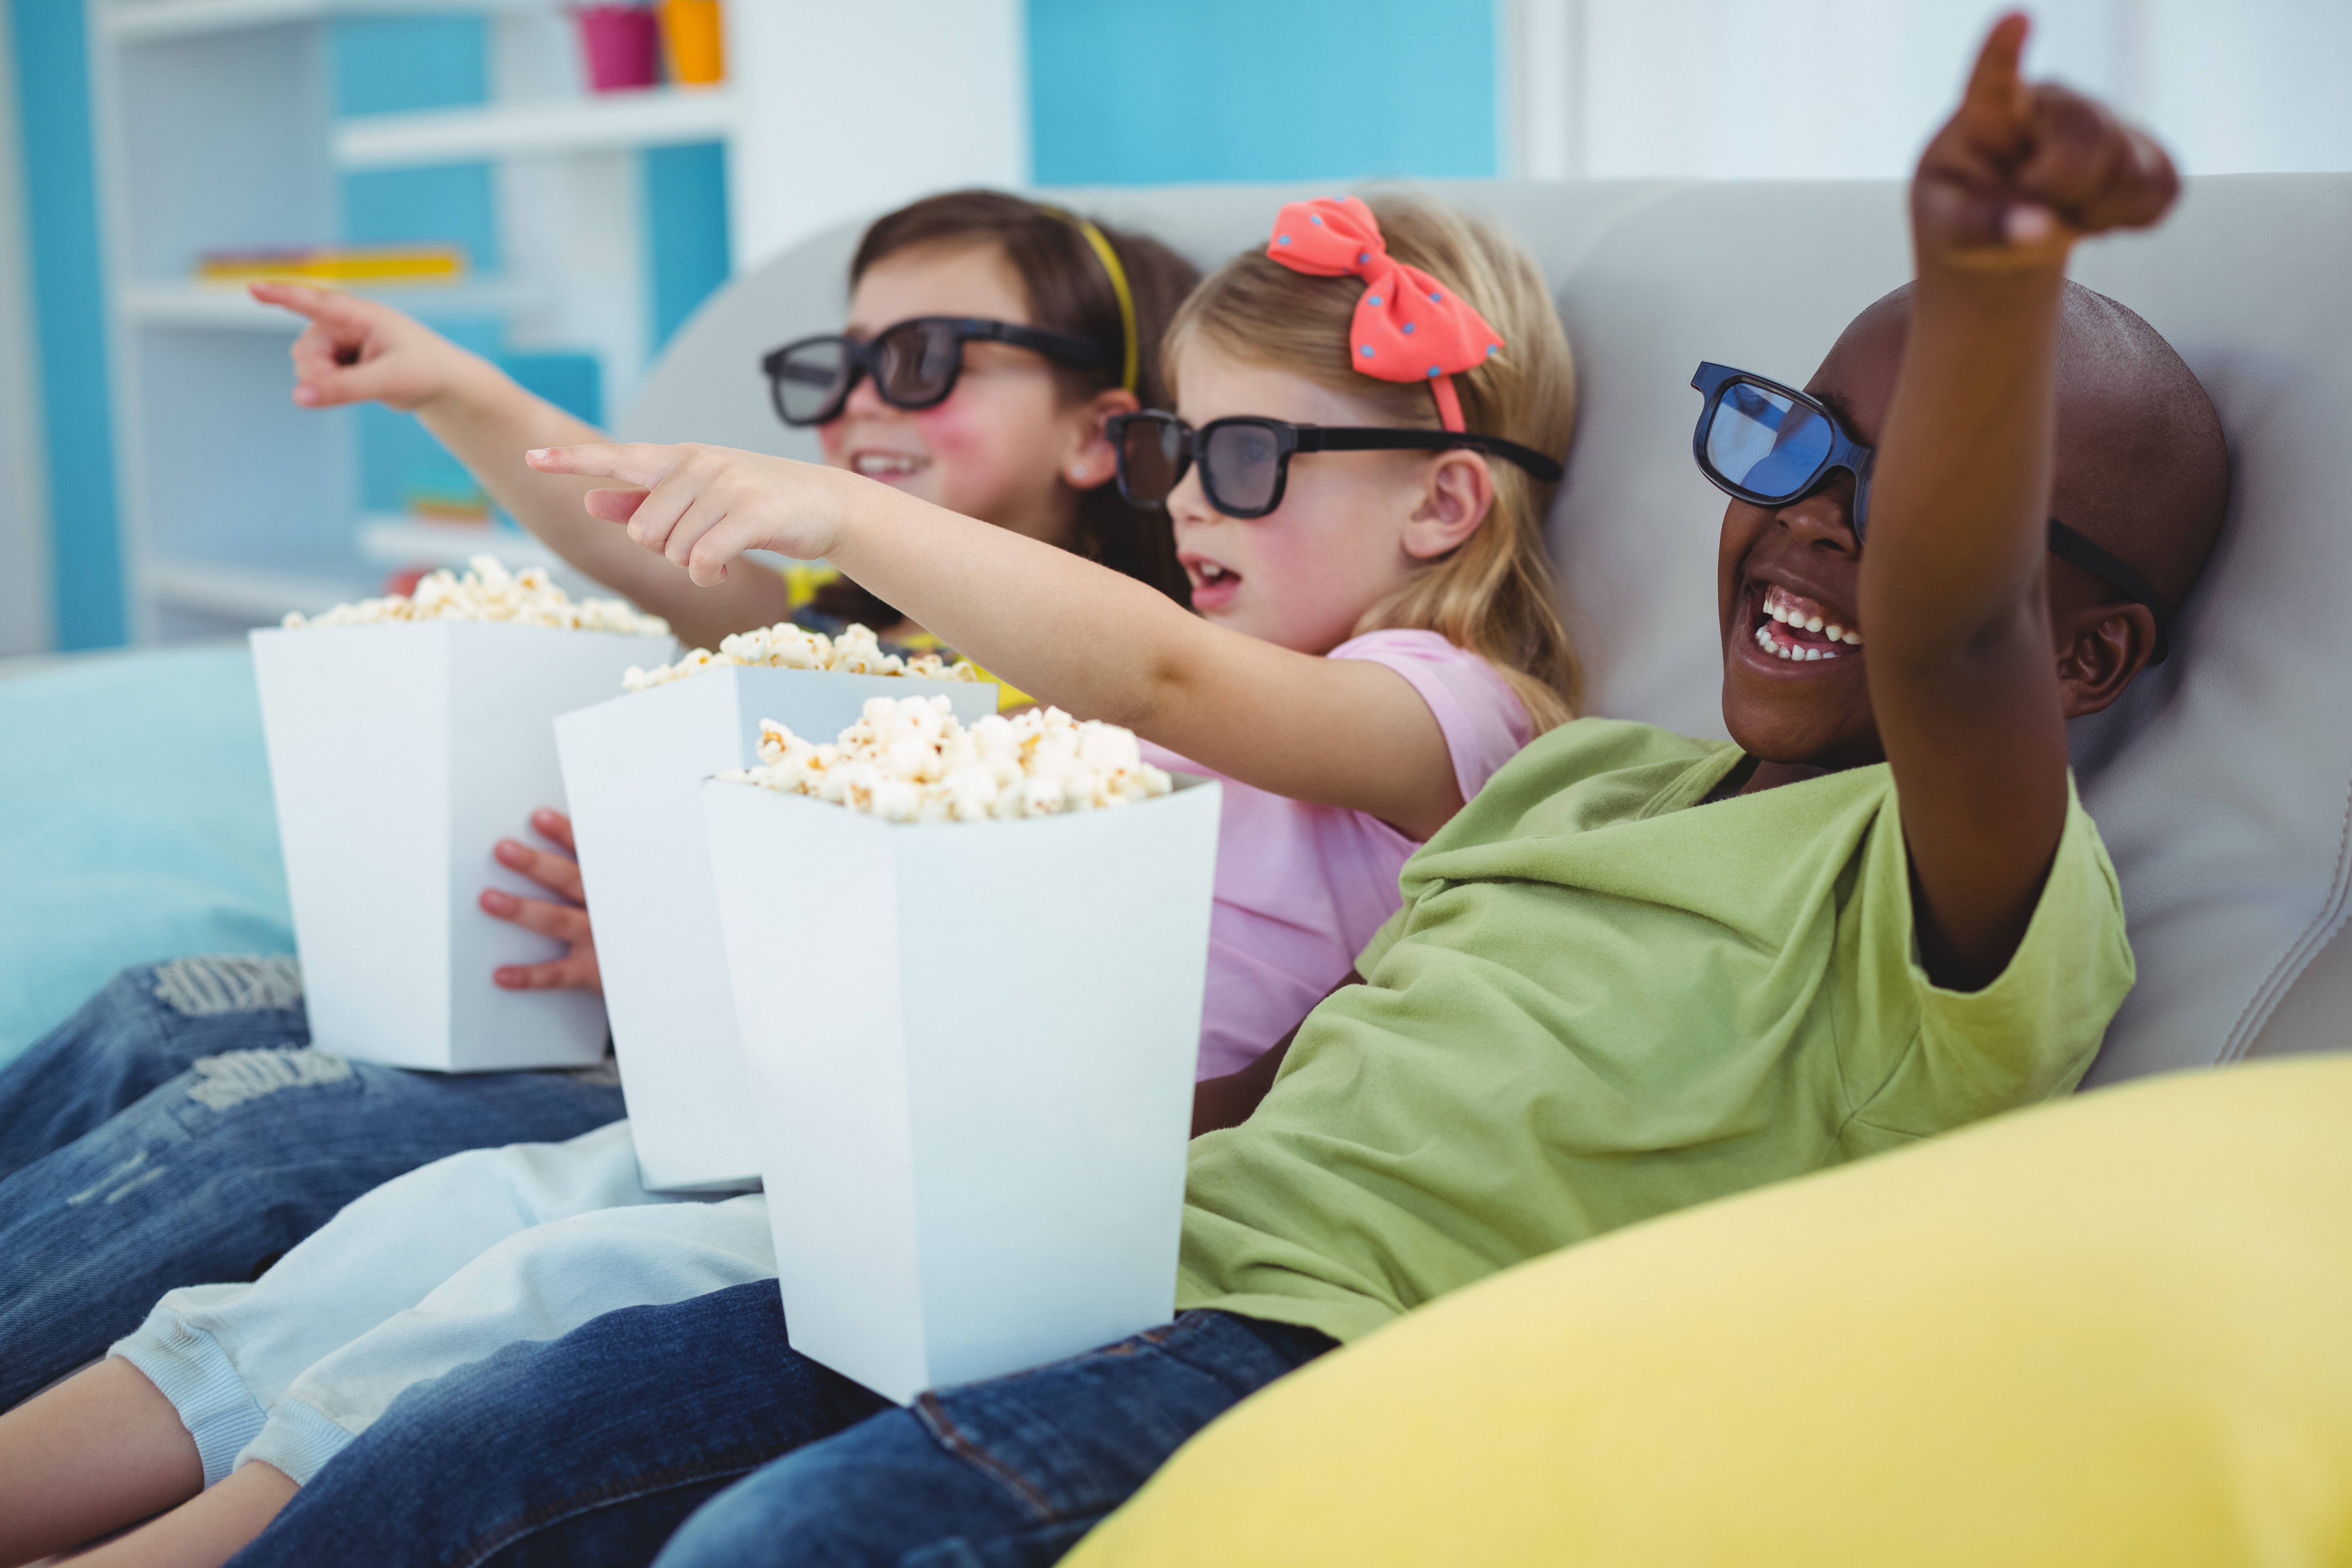 A group of kids watching a movie for a birthday party.